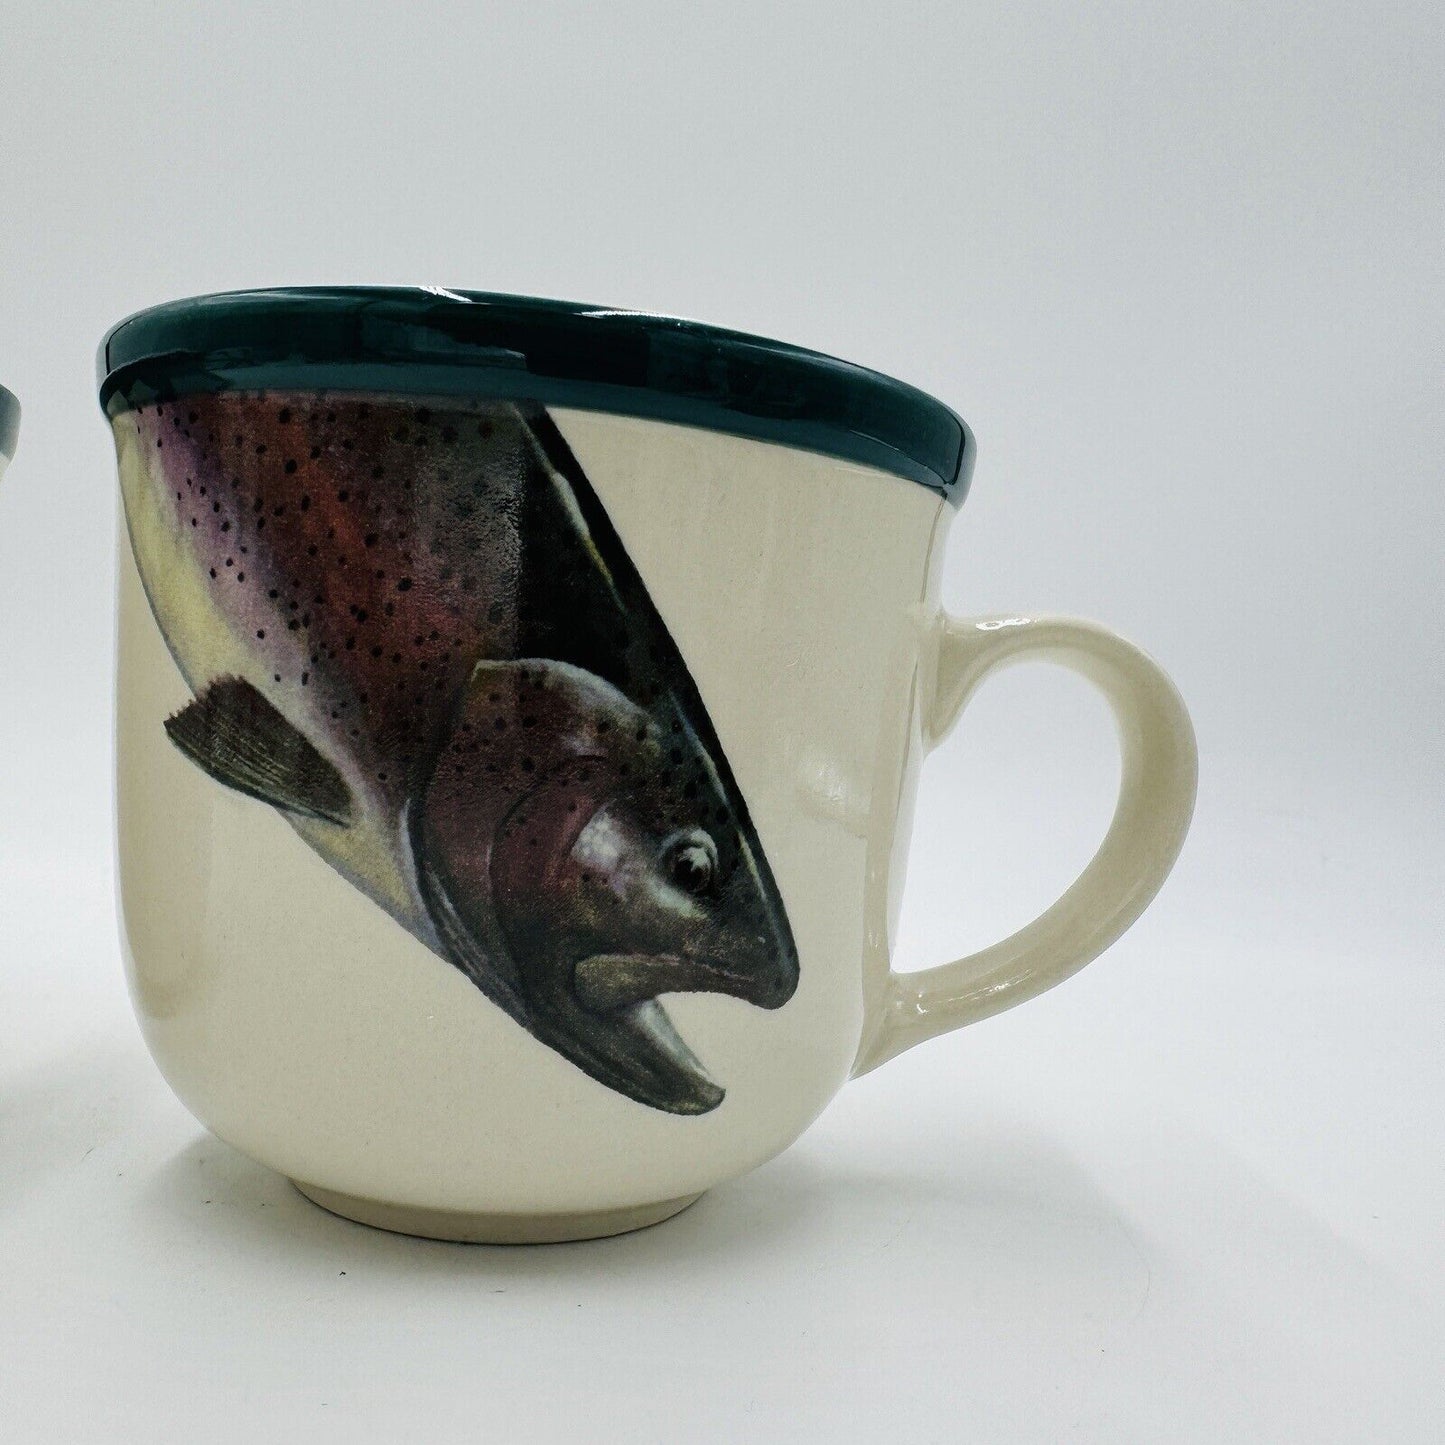 Vtg Angler's Expressions 1998 Trout  Tienshan By Geoff Hager Coffee Mugs Set 2